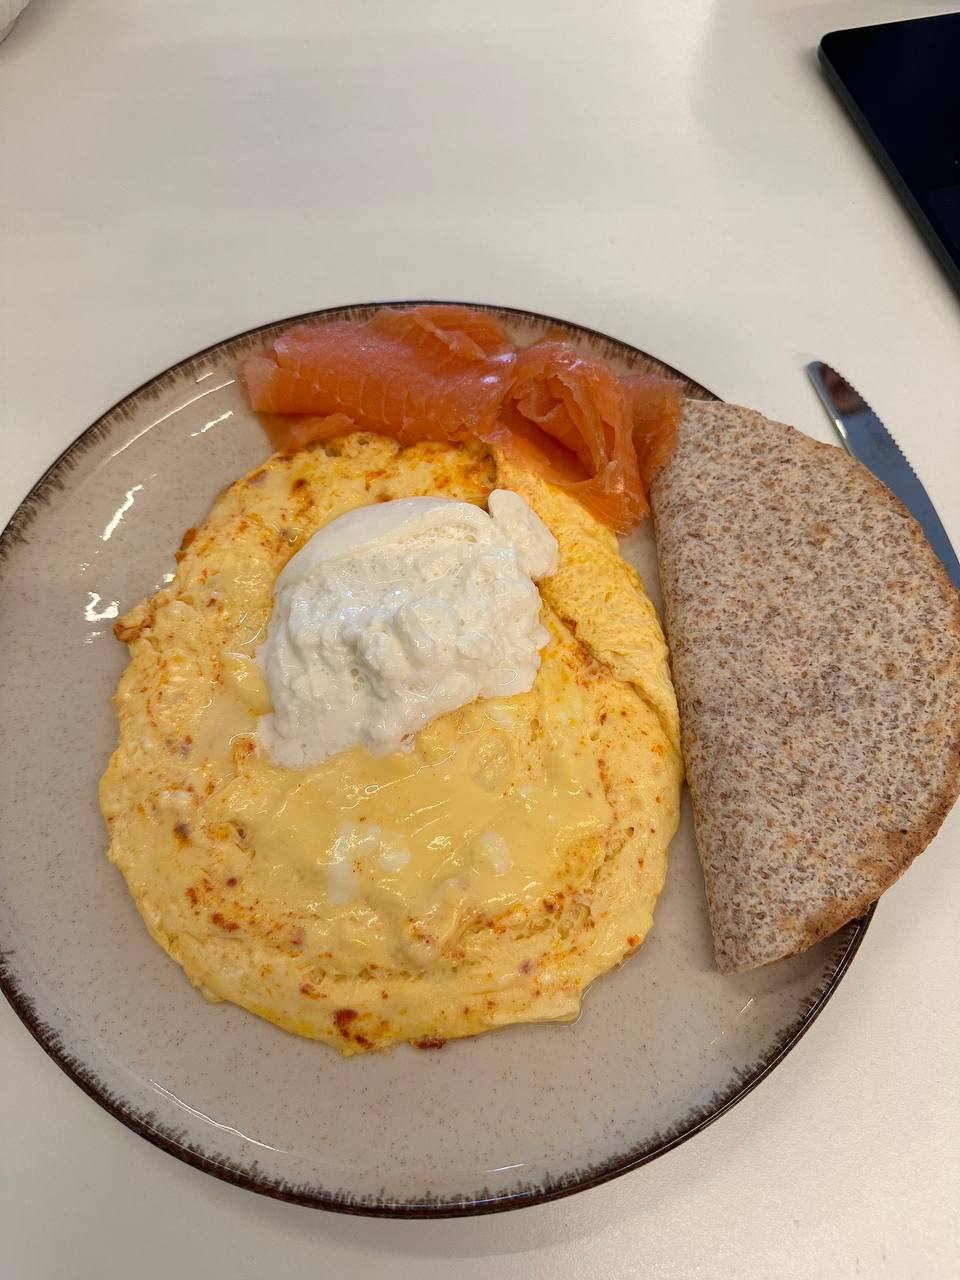 Breakfast/brunch Dish With Eggs, Smoked Salmon, And Wholegrain Bread